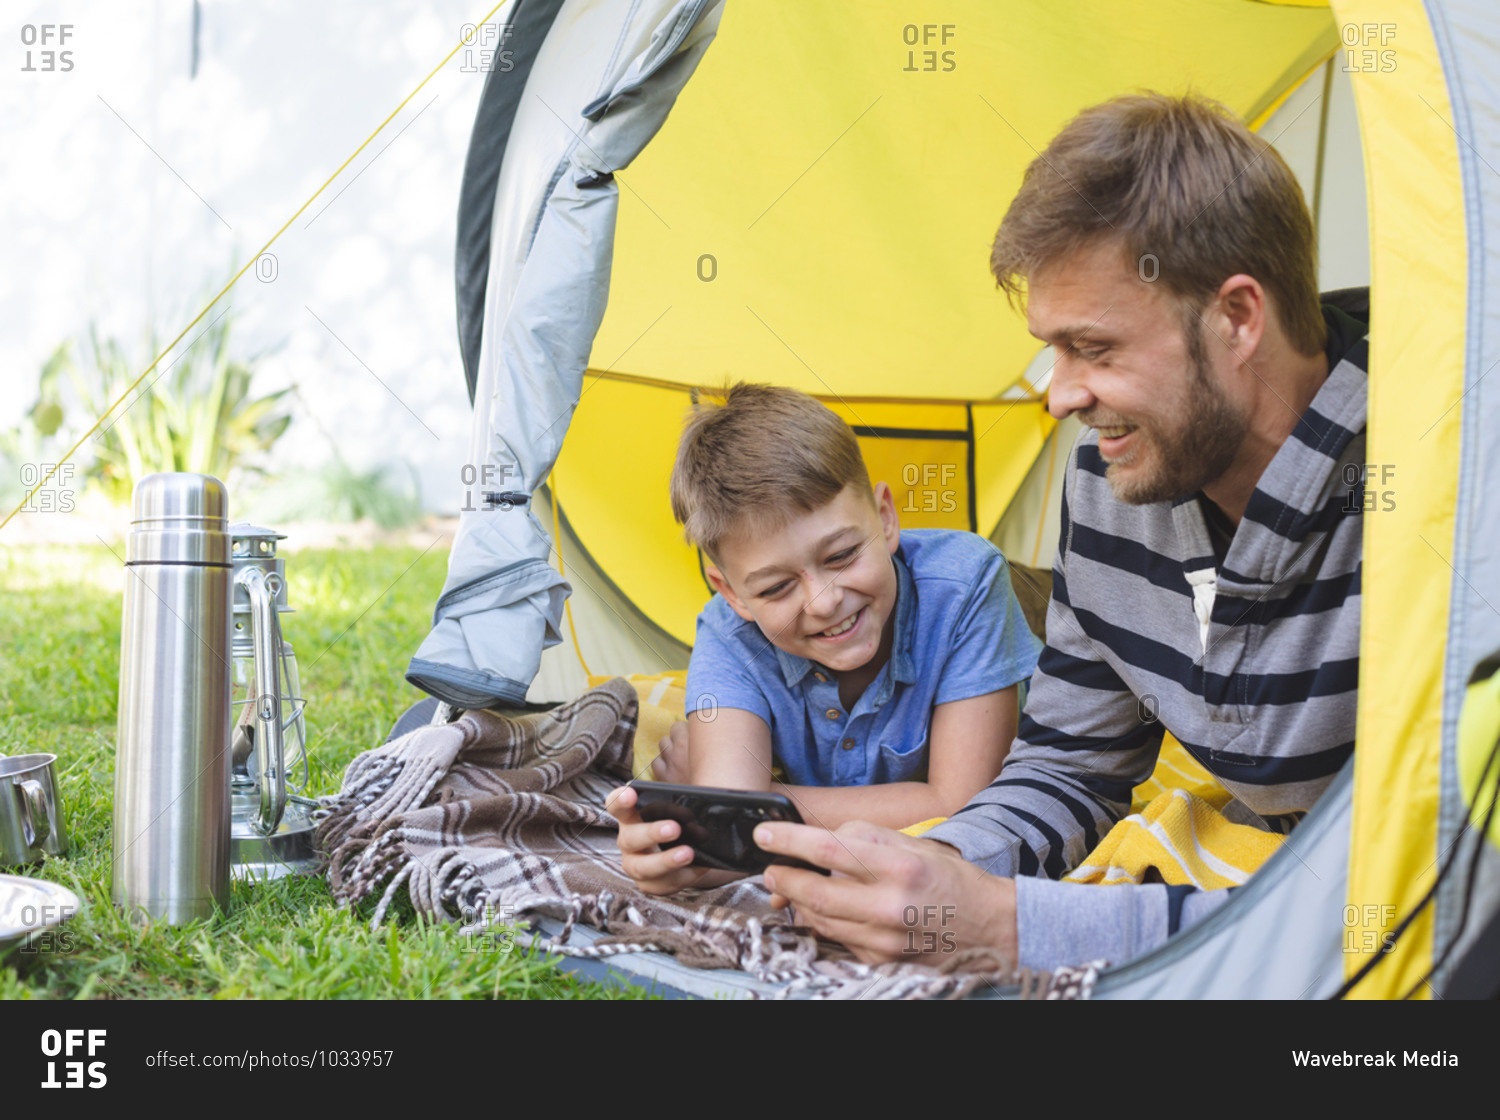 Caucasian man spending time with his son together, camping in garden, lying in tent using smartphone, smiling. Social distancing during Covid 19 Coronavirus quarantine lockdown.